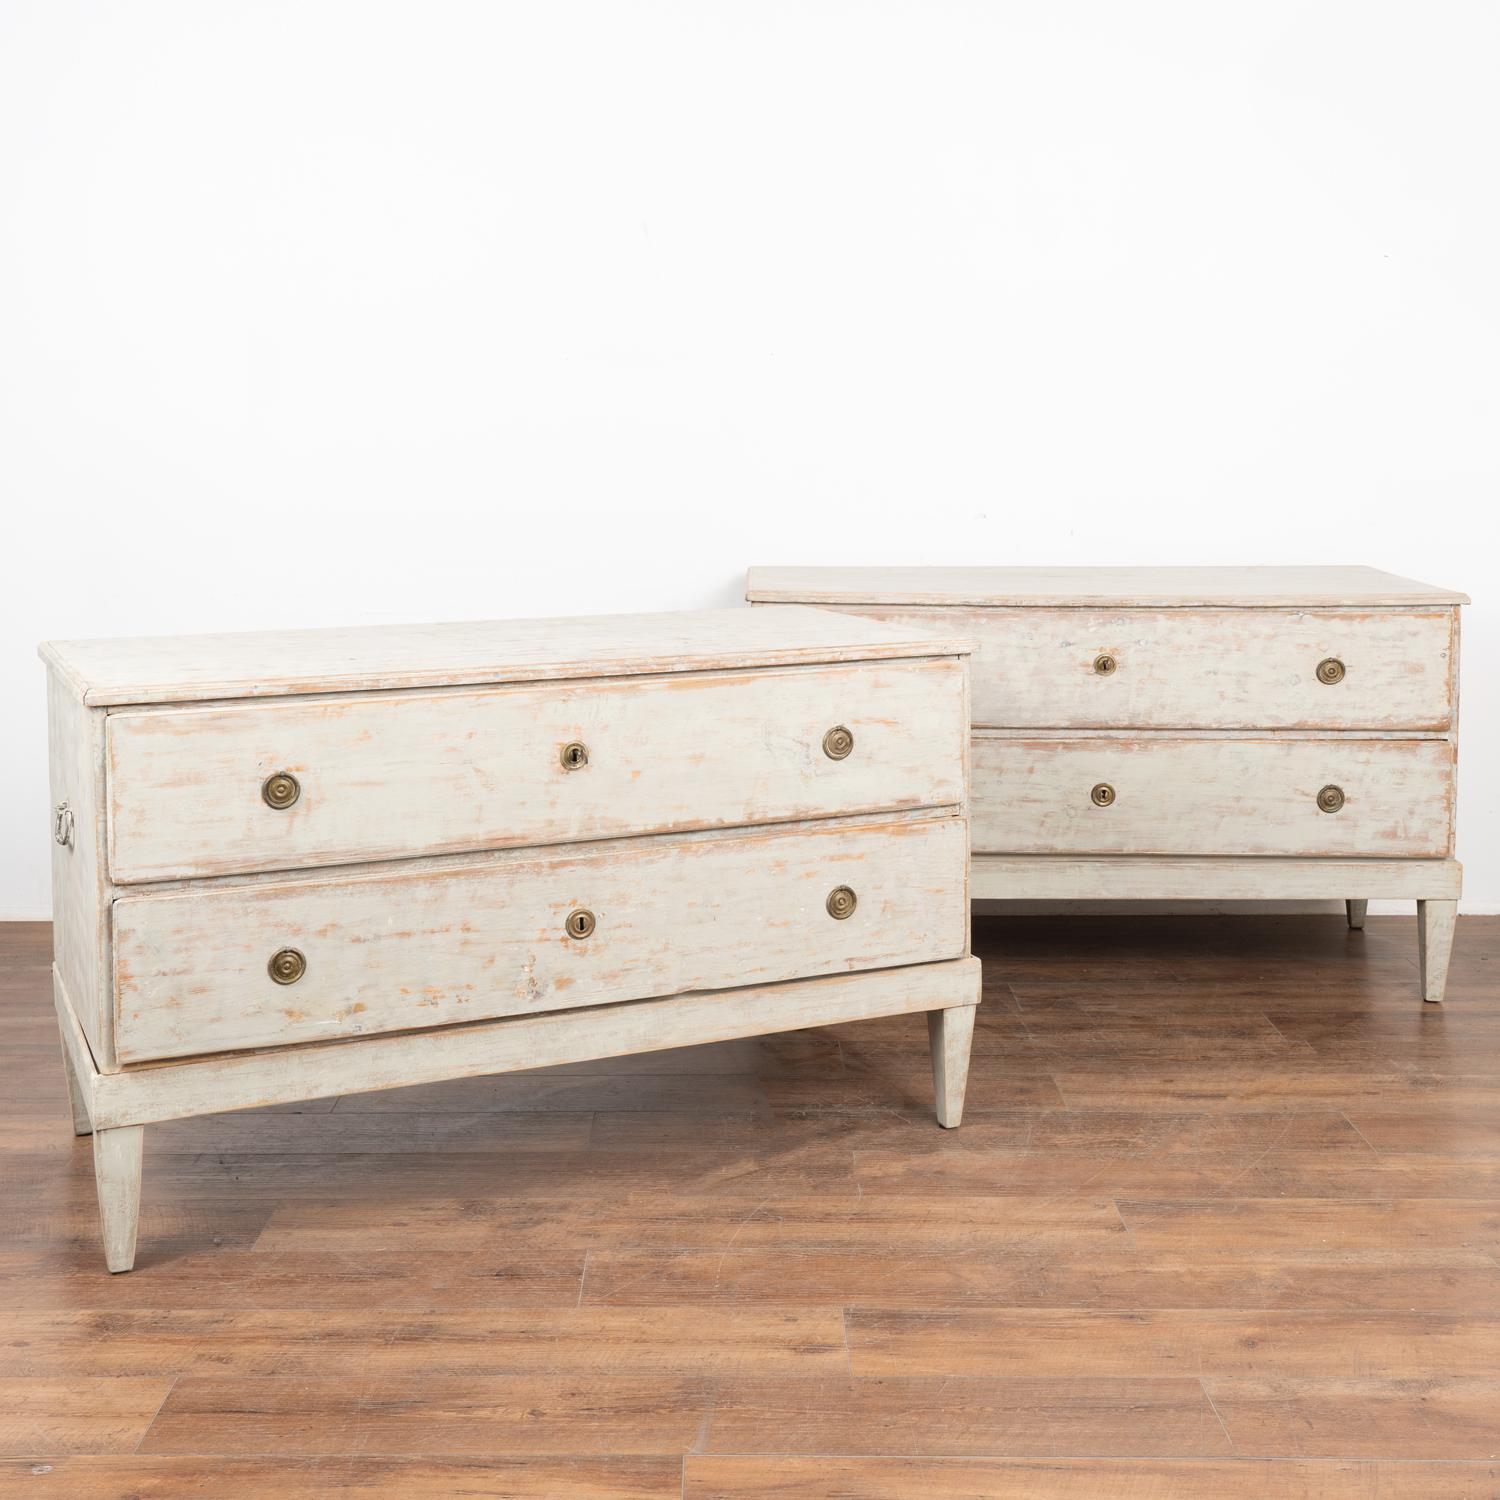 Pair, long pine chest of two drawers with newer, professionally applied light dove gray painted and distressed finish which fits the age and grace of the pair.
The unique size of 4.5' long make these chests a special find.
Two brass pulls on each